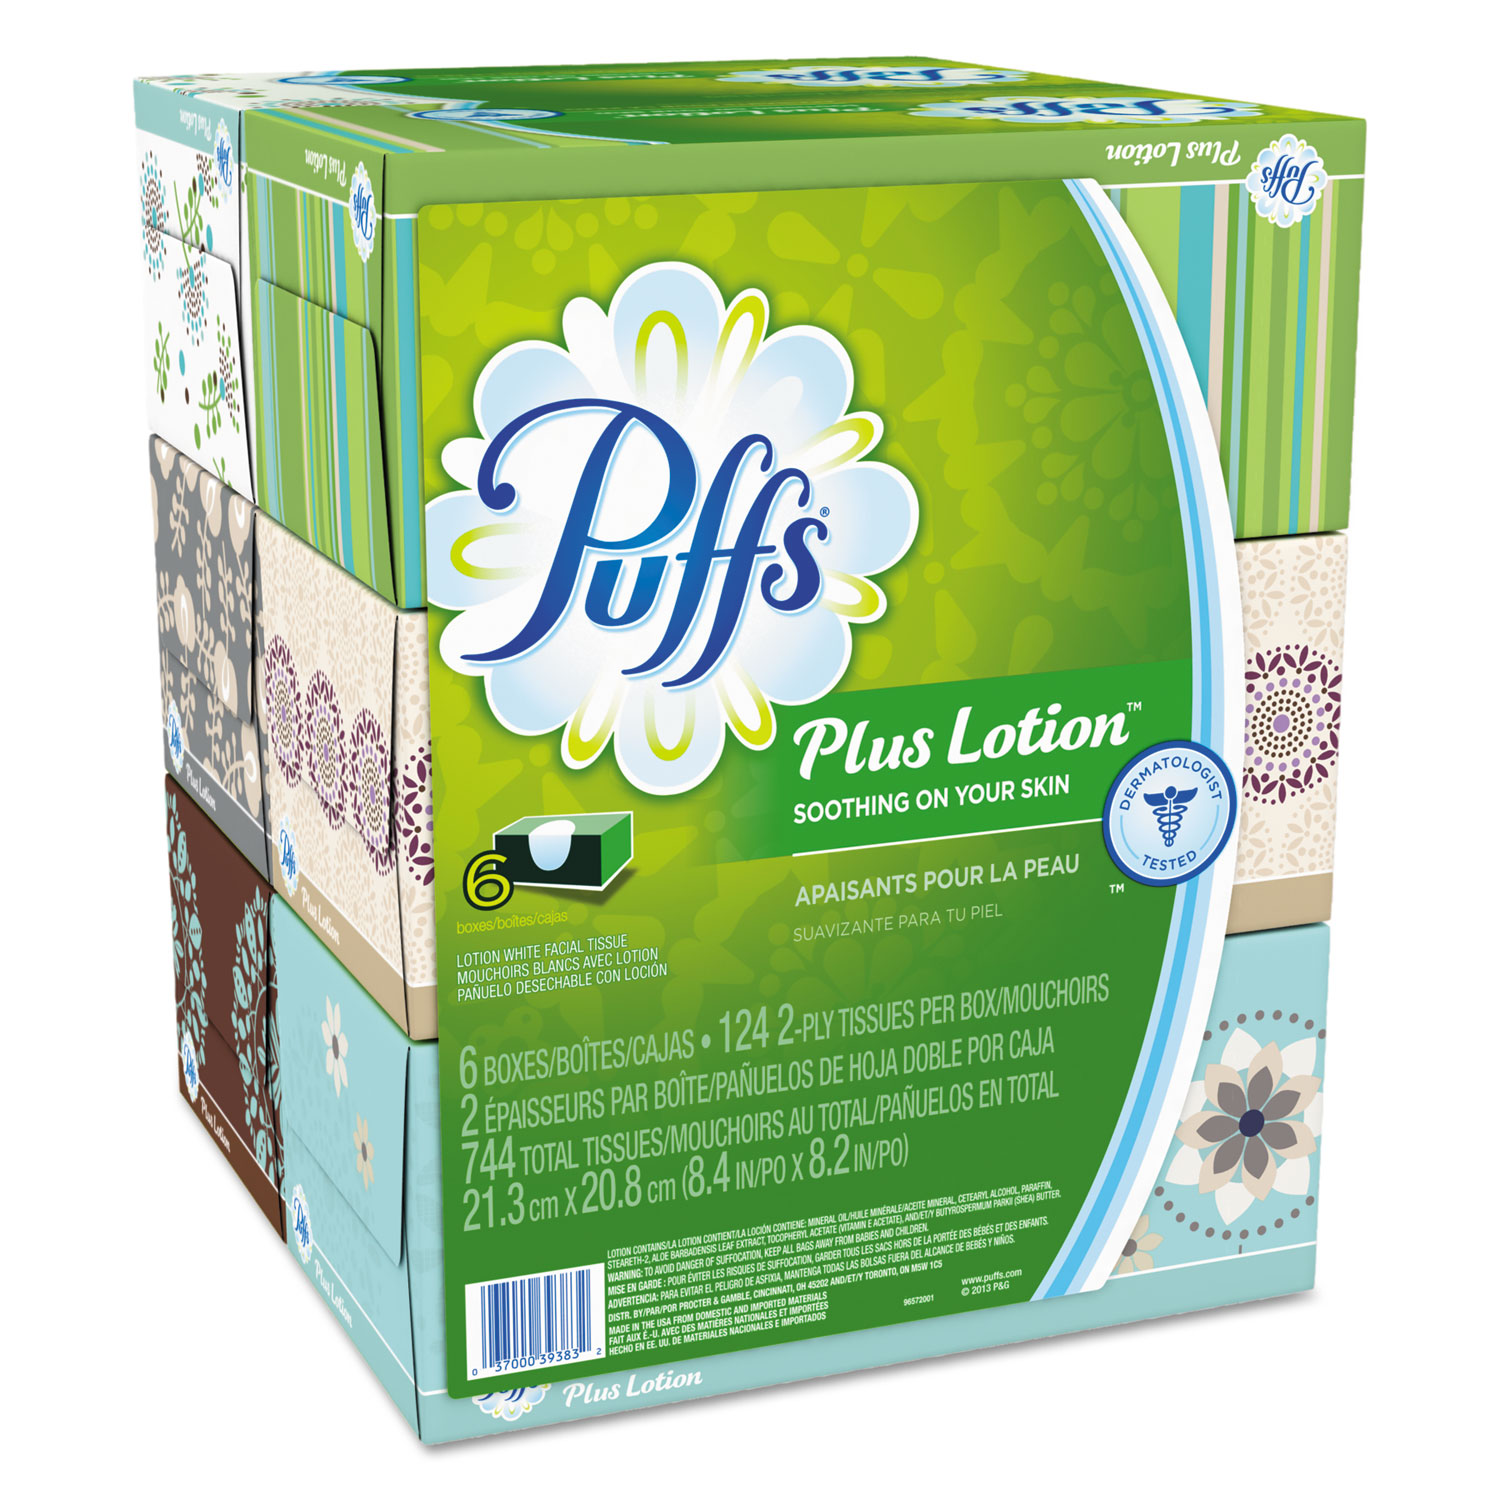  Puffs 39383 Plus Lotion Facial Tissue, 2-Ply, White, 124 Sheets/Box, 6 Boxes/Pack, 4 Packs/Carton (PGC39383) 